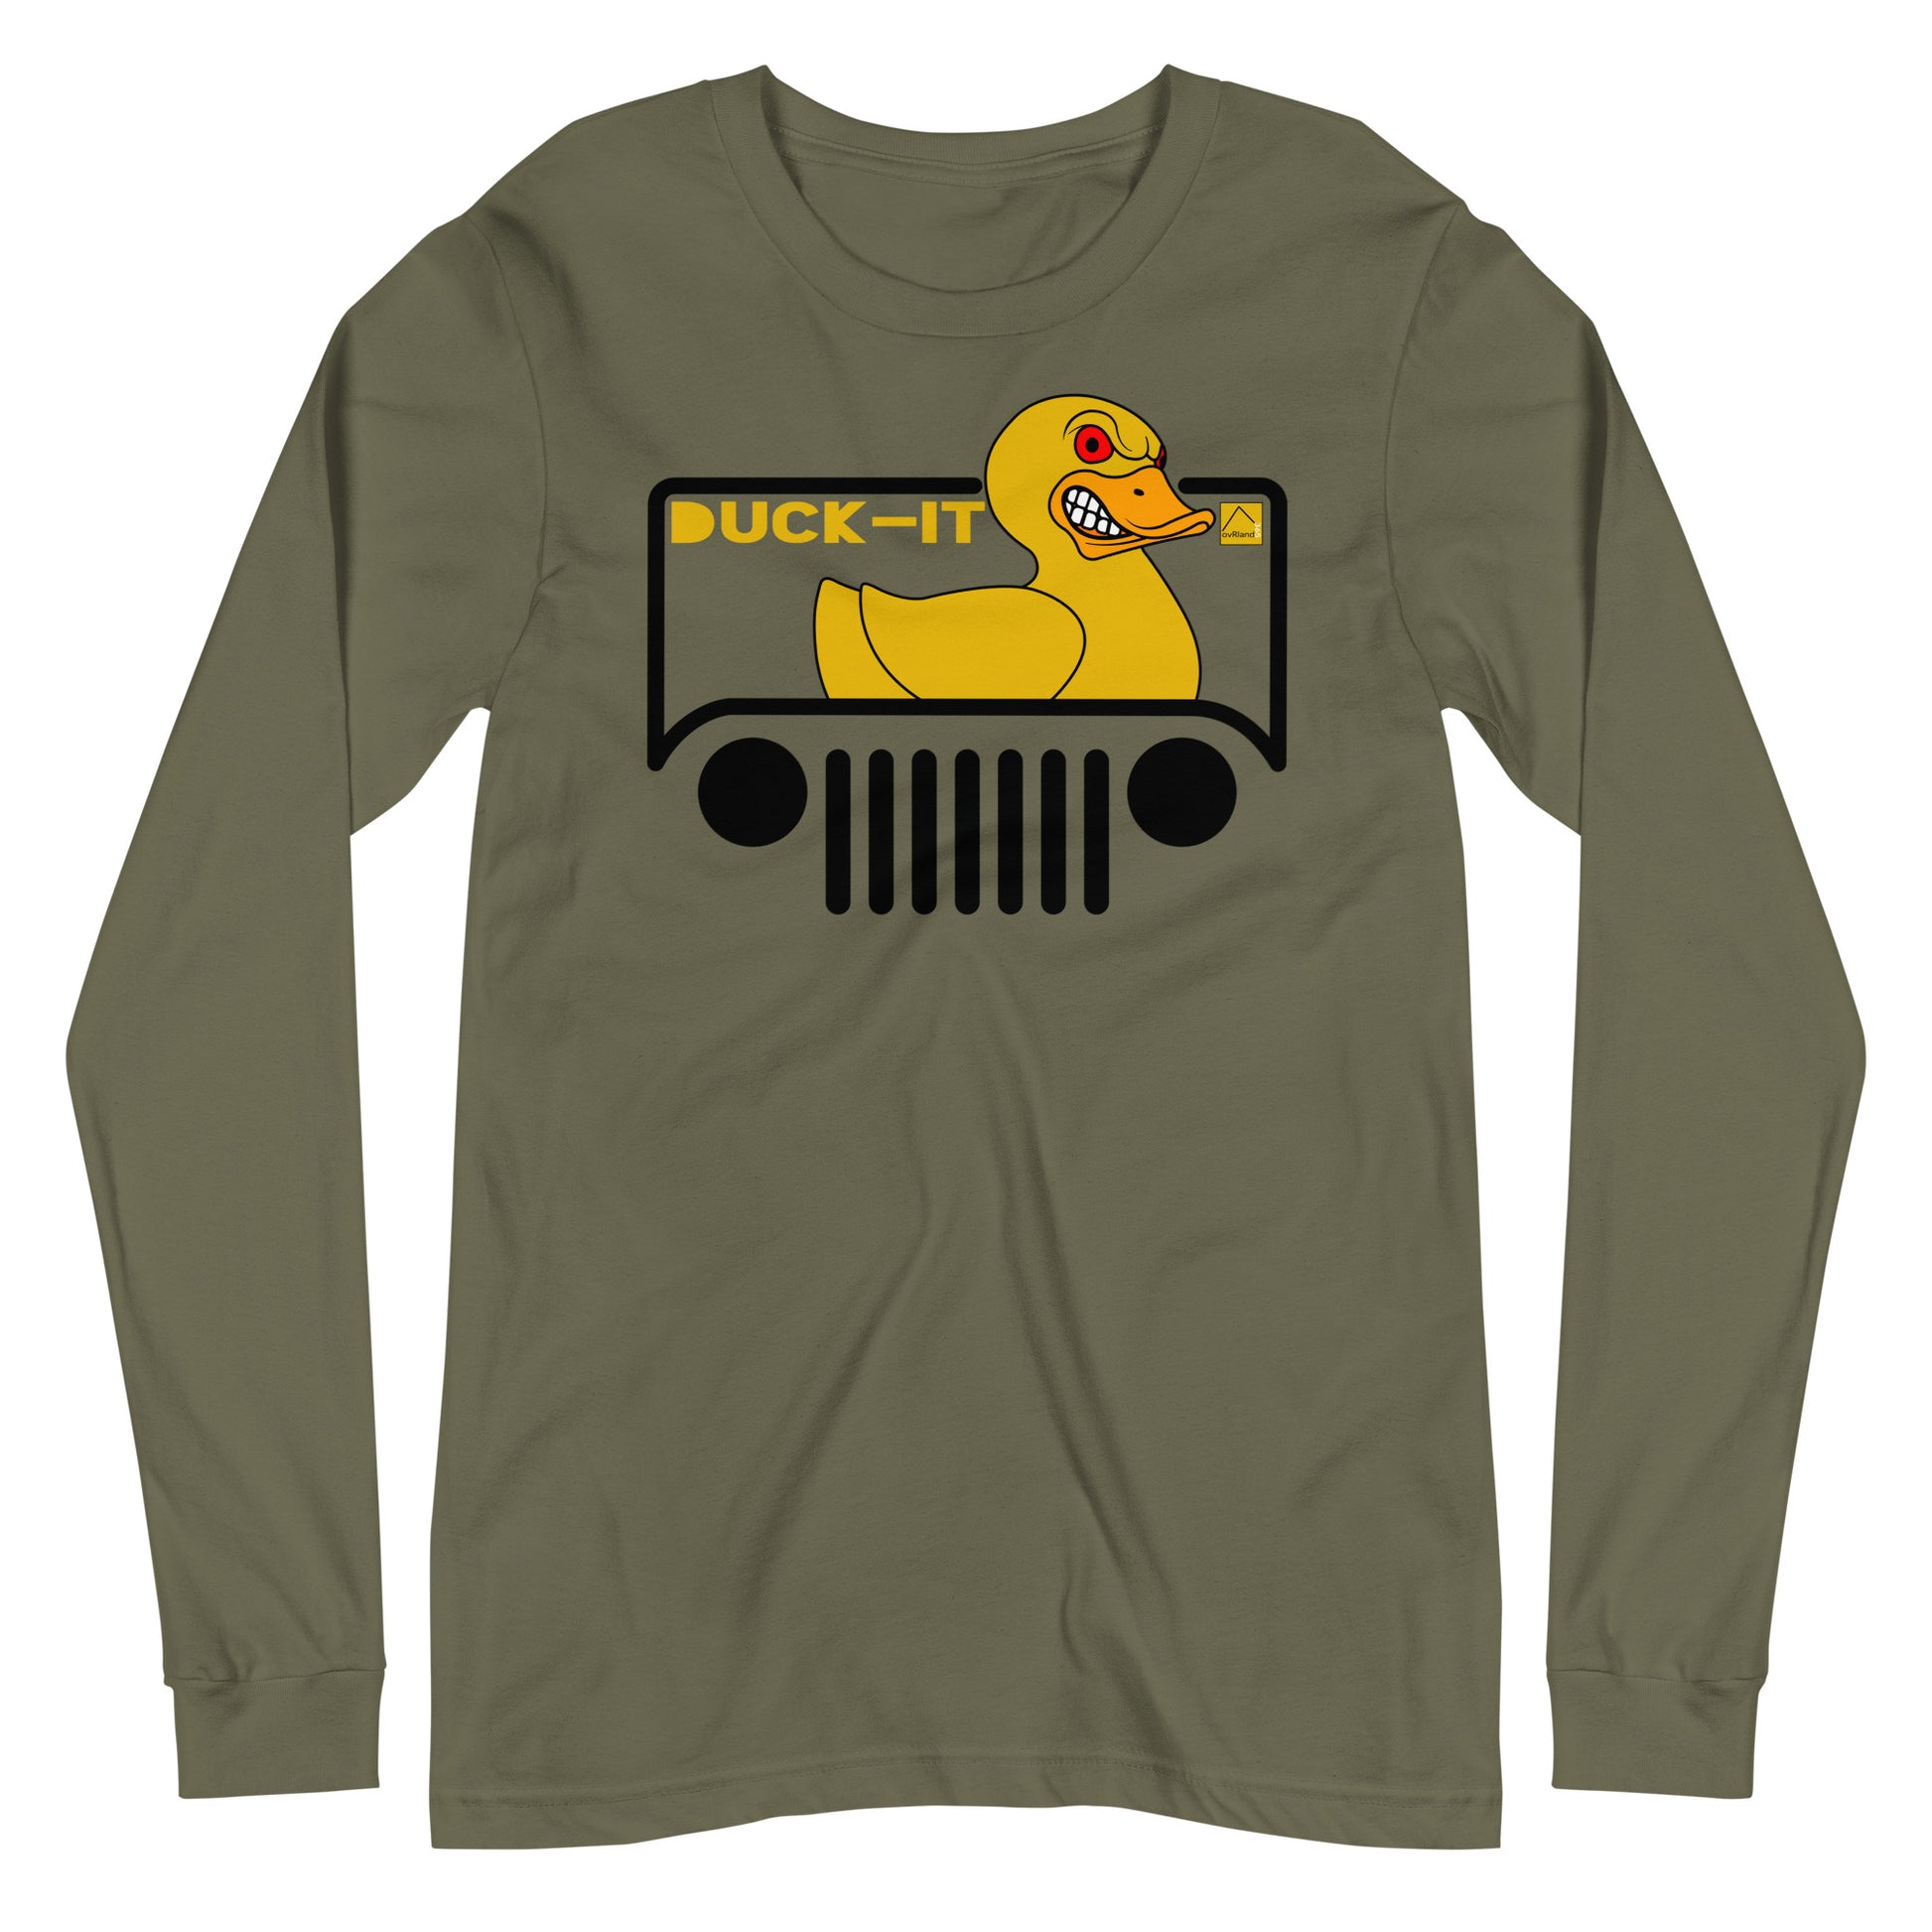 Jeep Green angry duck DUCK-IT long-sleeve. overland365.com